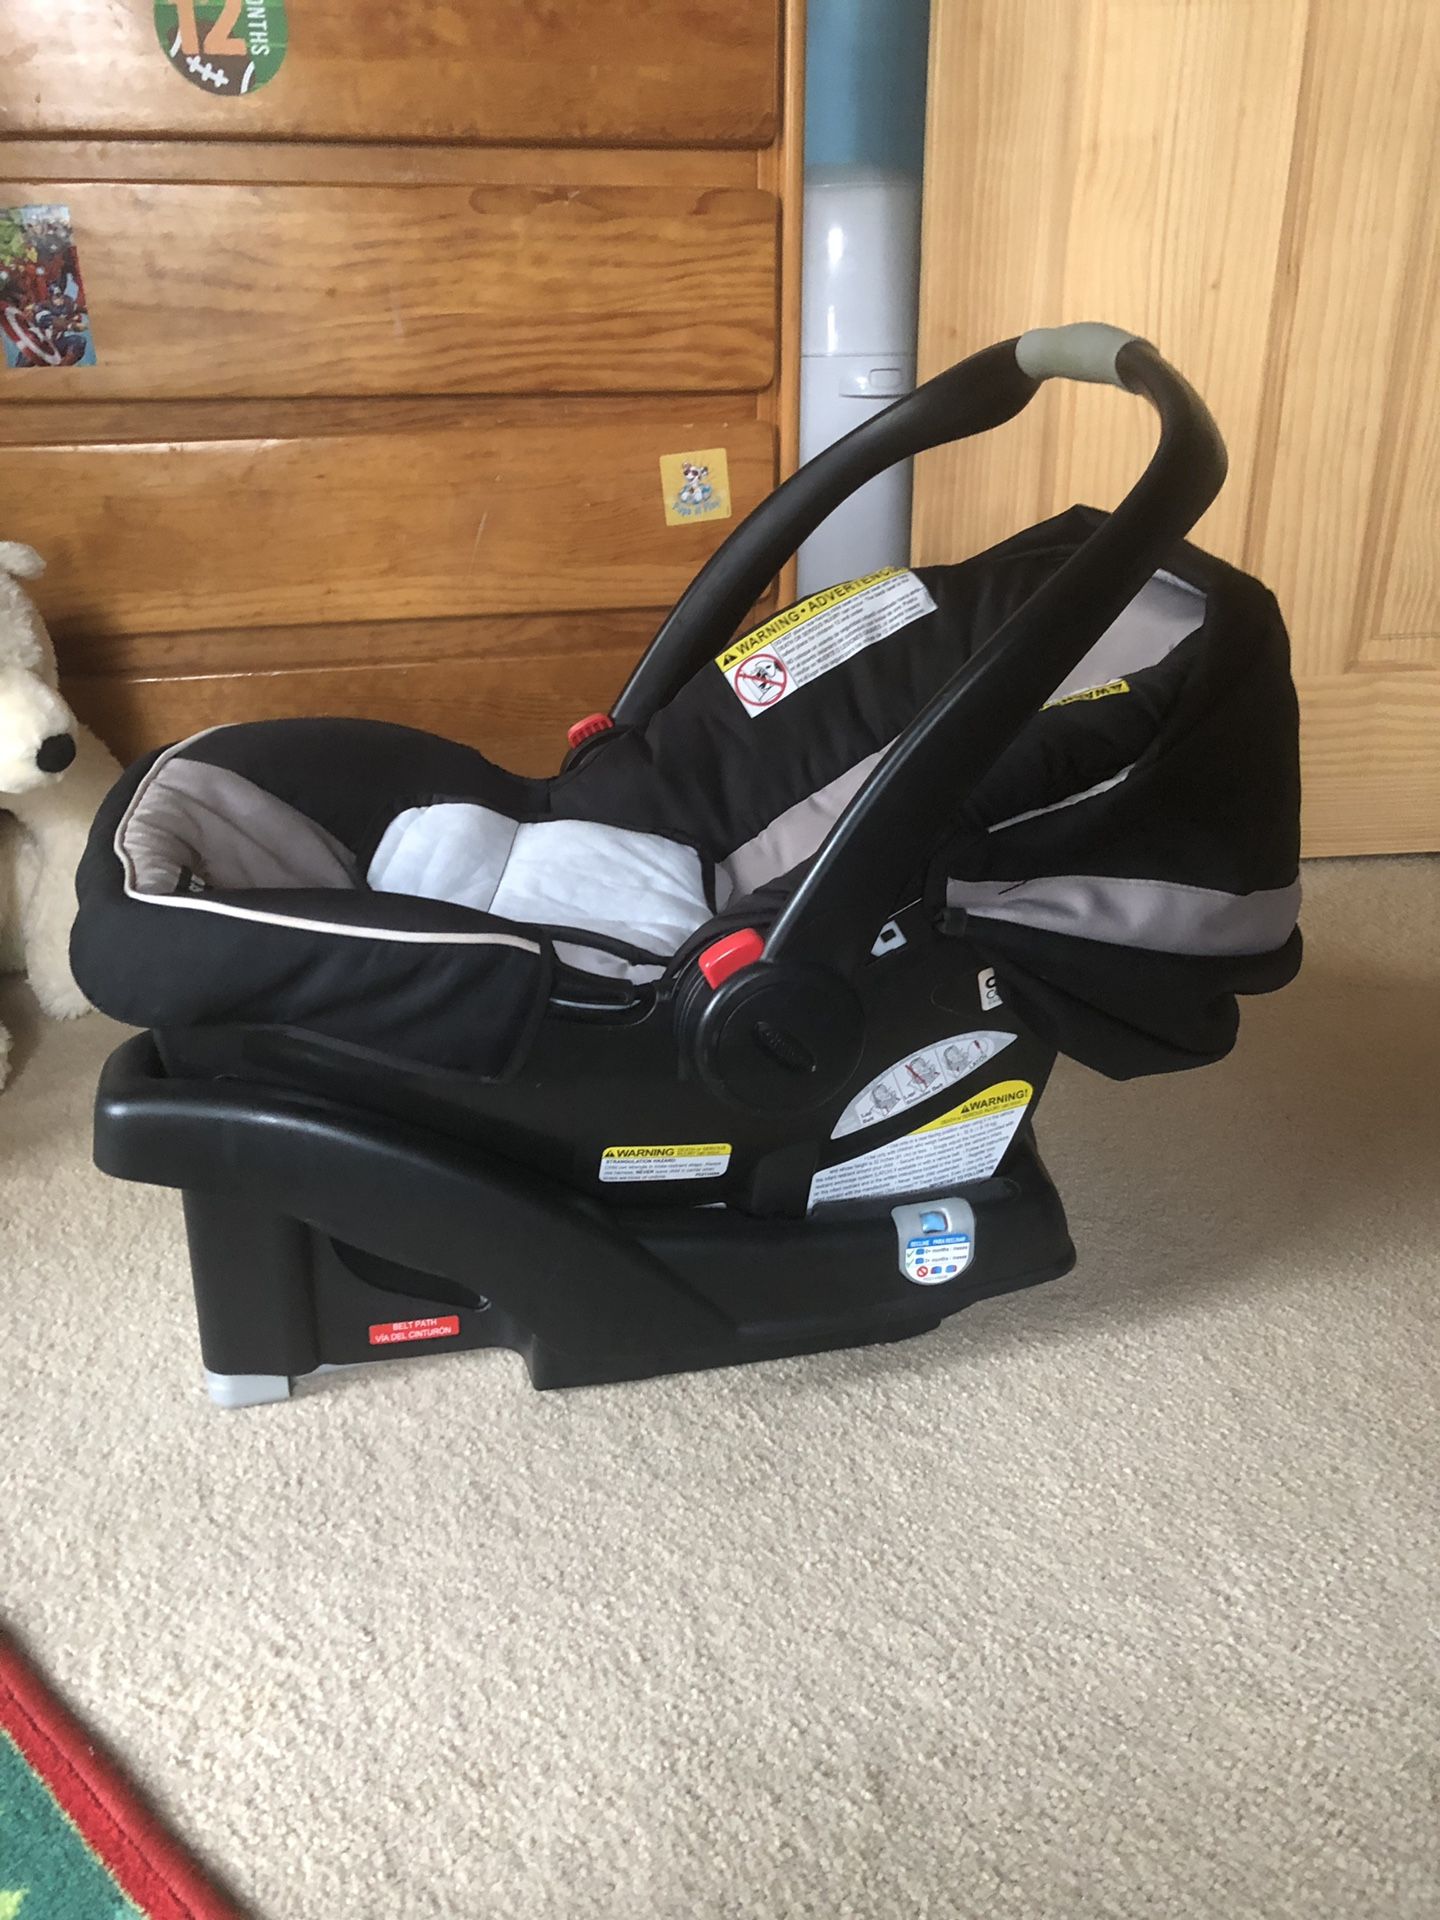 Graco infant click-in car seat